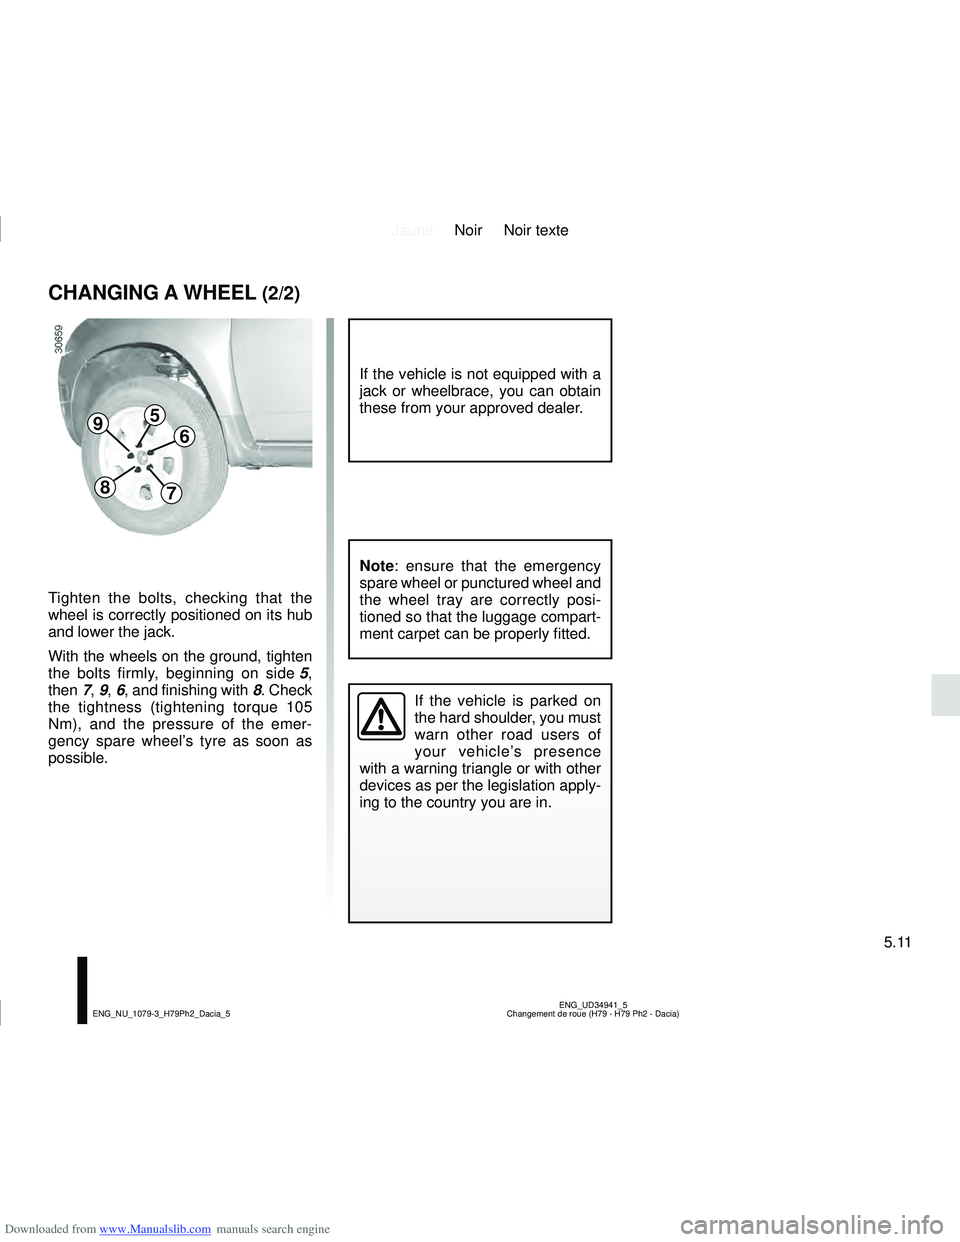 DACIA DUSTER 2020  Owners Manual Downloaded from www.Manualslib.com manuals search engine JauneNoir Noir texte
5.11
ENG_UD34941_5
Changement de roue (H79 - H79 Ph2 - Dacia)
ENG_NU_1079-3_H79Ph2_Dacia_5
CHANGING A WHEEL (2/2)
If the v